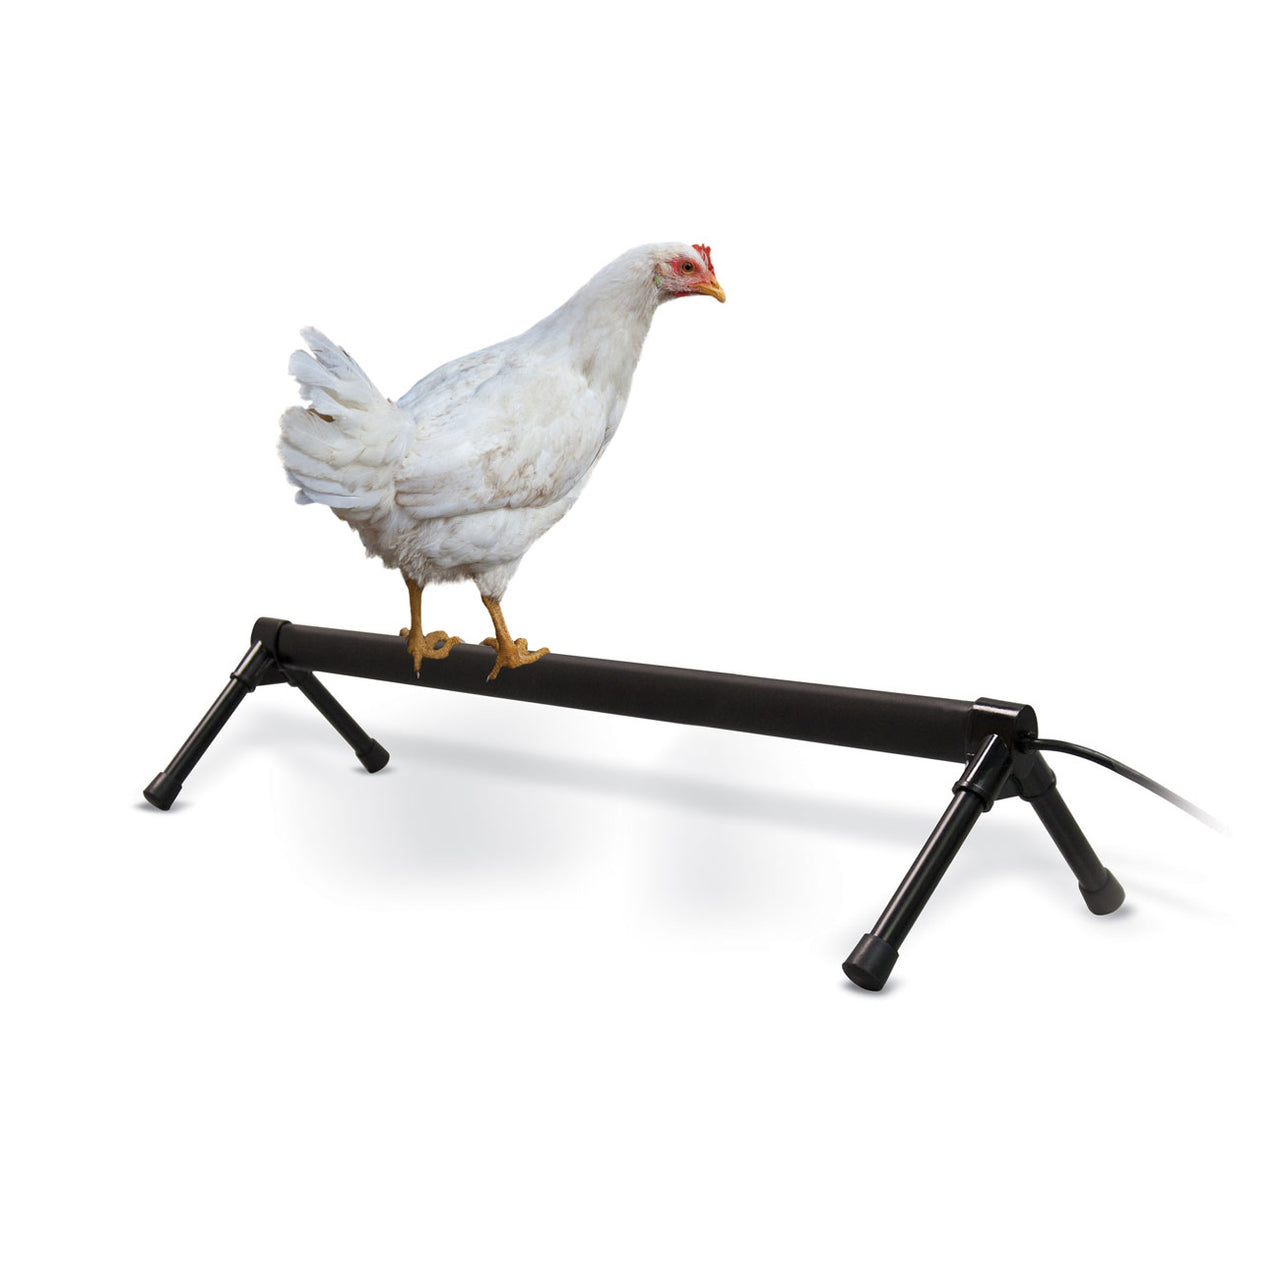 K&h Pet Products Thermo-Chicken Perch Gray 36 - Chicken Perch K&h Pet Products - Canada